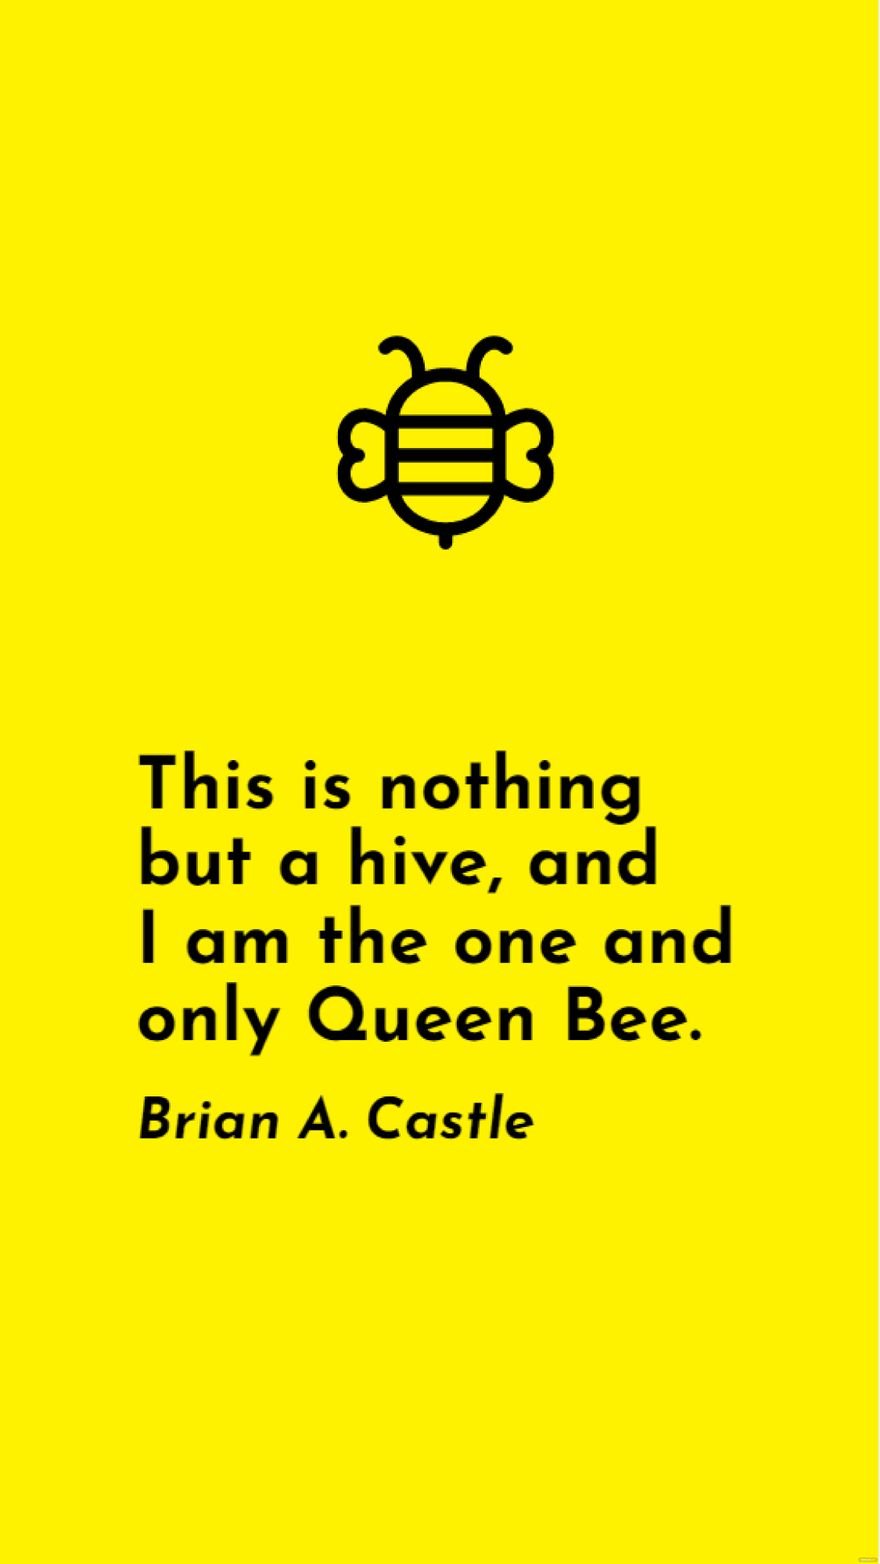 Brian A Castle - This is nothing but a hive, and I am the one and only Queen Bee.